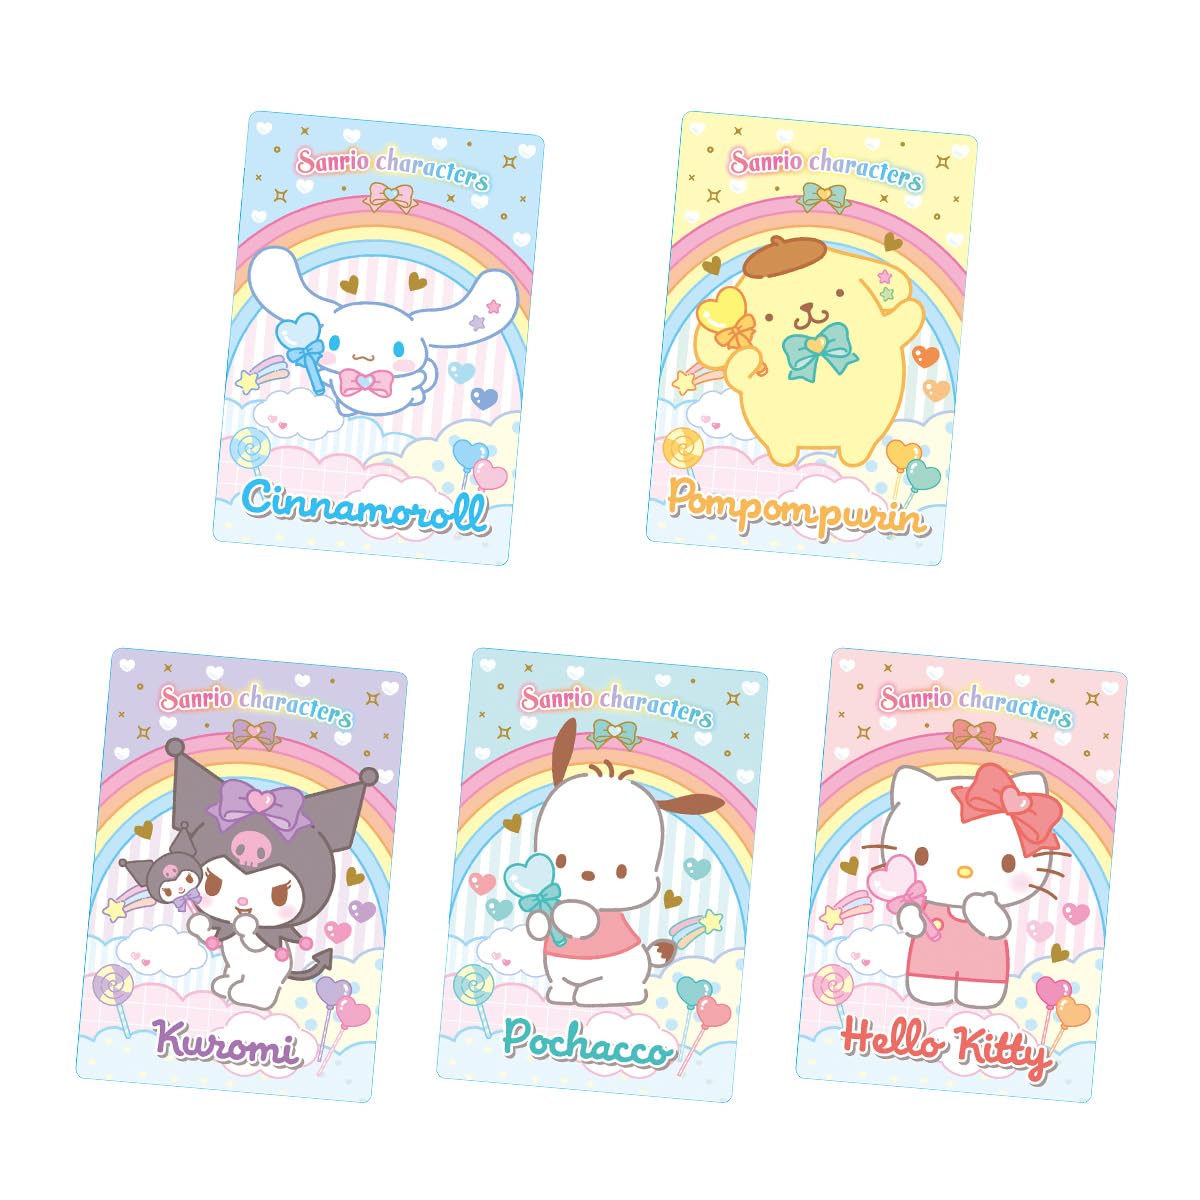 Sanrio Characters Wafers Vol.6-Whole Box (20packs)-Bandai-Ace Cards & Collectibles